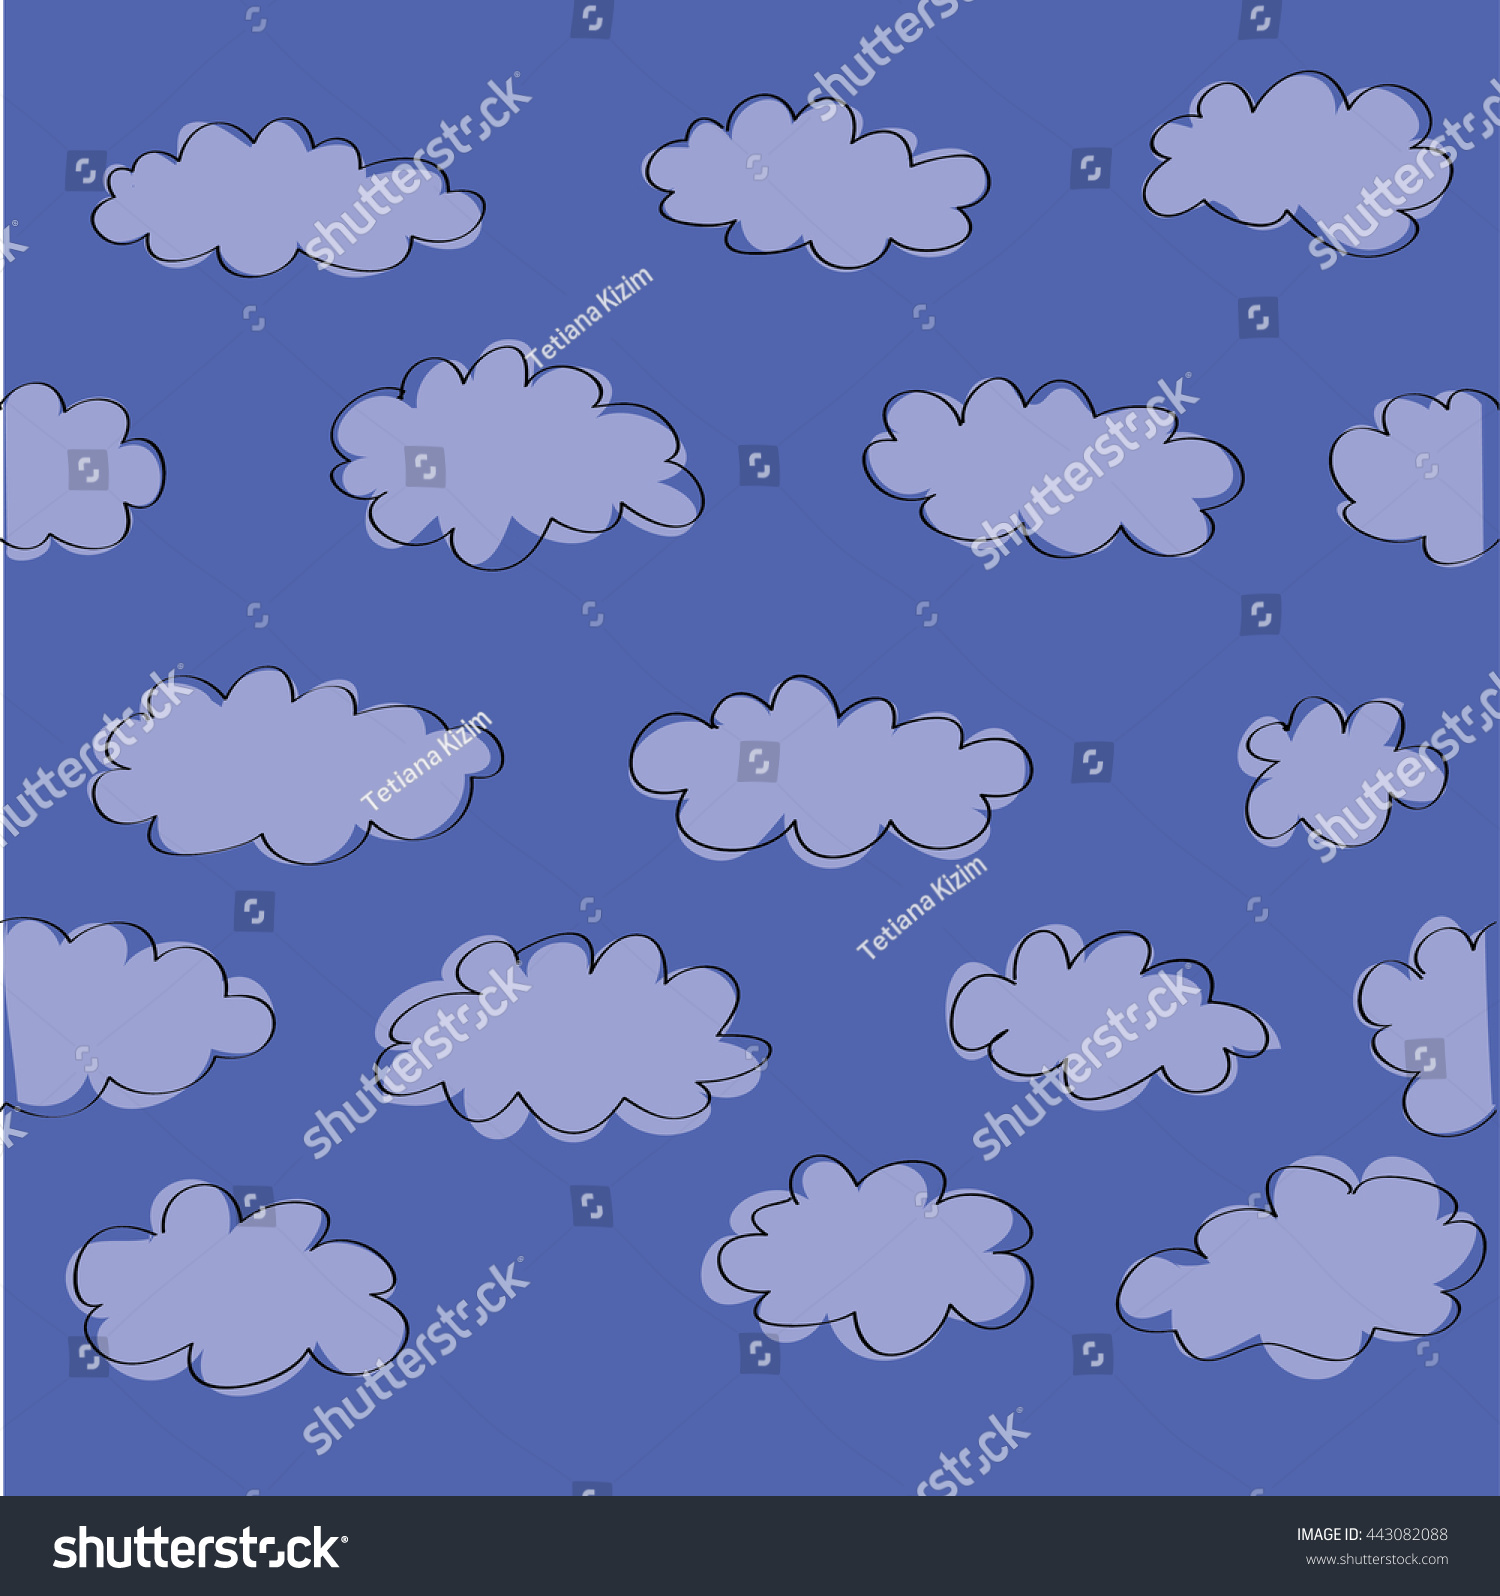 Clouds Pattern Stock Photo (Photo, Vector, Illustration) 443082088 ...